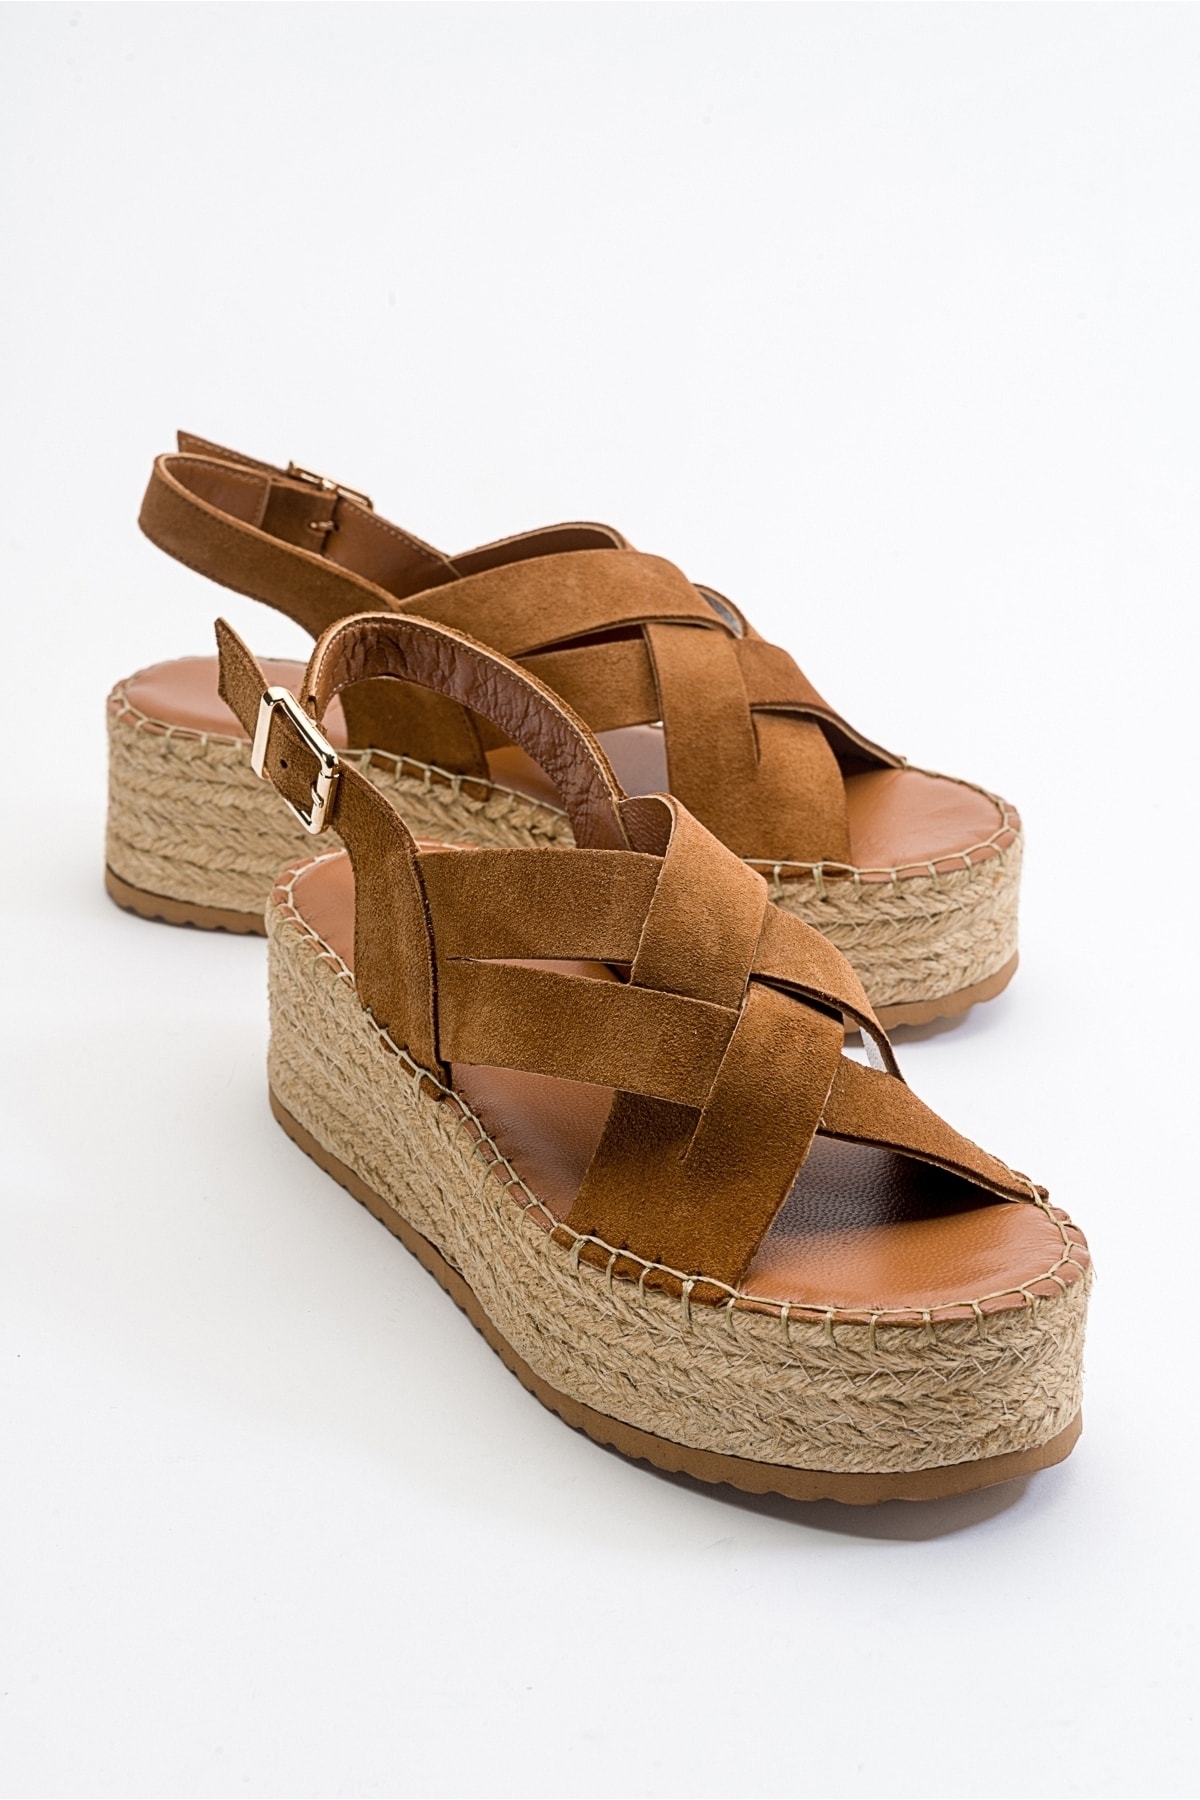 Levně LuviShoes Lontano Women's Tan Sandals with Genuine Leather and Suede